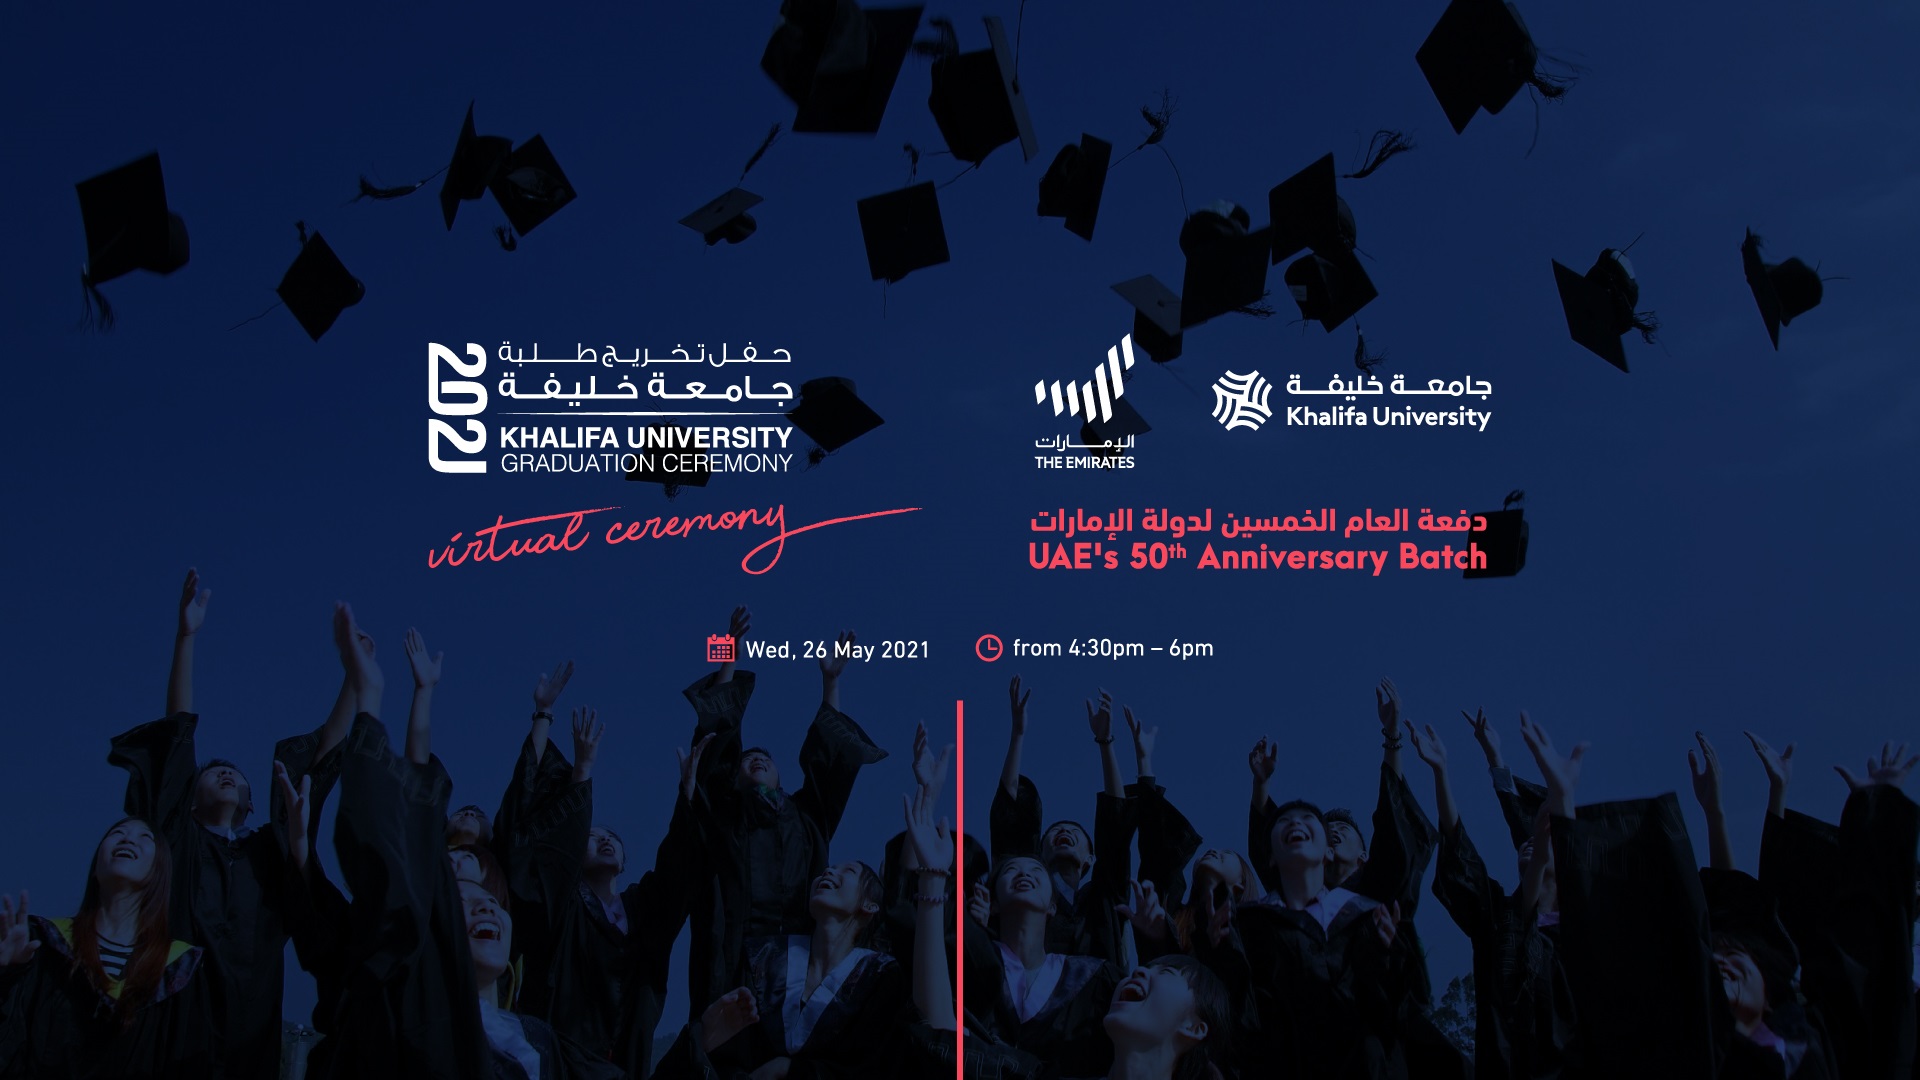 Khalifa University Celebrates the Graduation of 885 Students from Bachelor, Master and PhD Programs in Science, Engineering and Arts at 2021 Commencement Ceremony